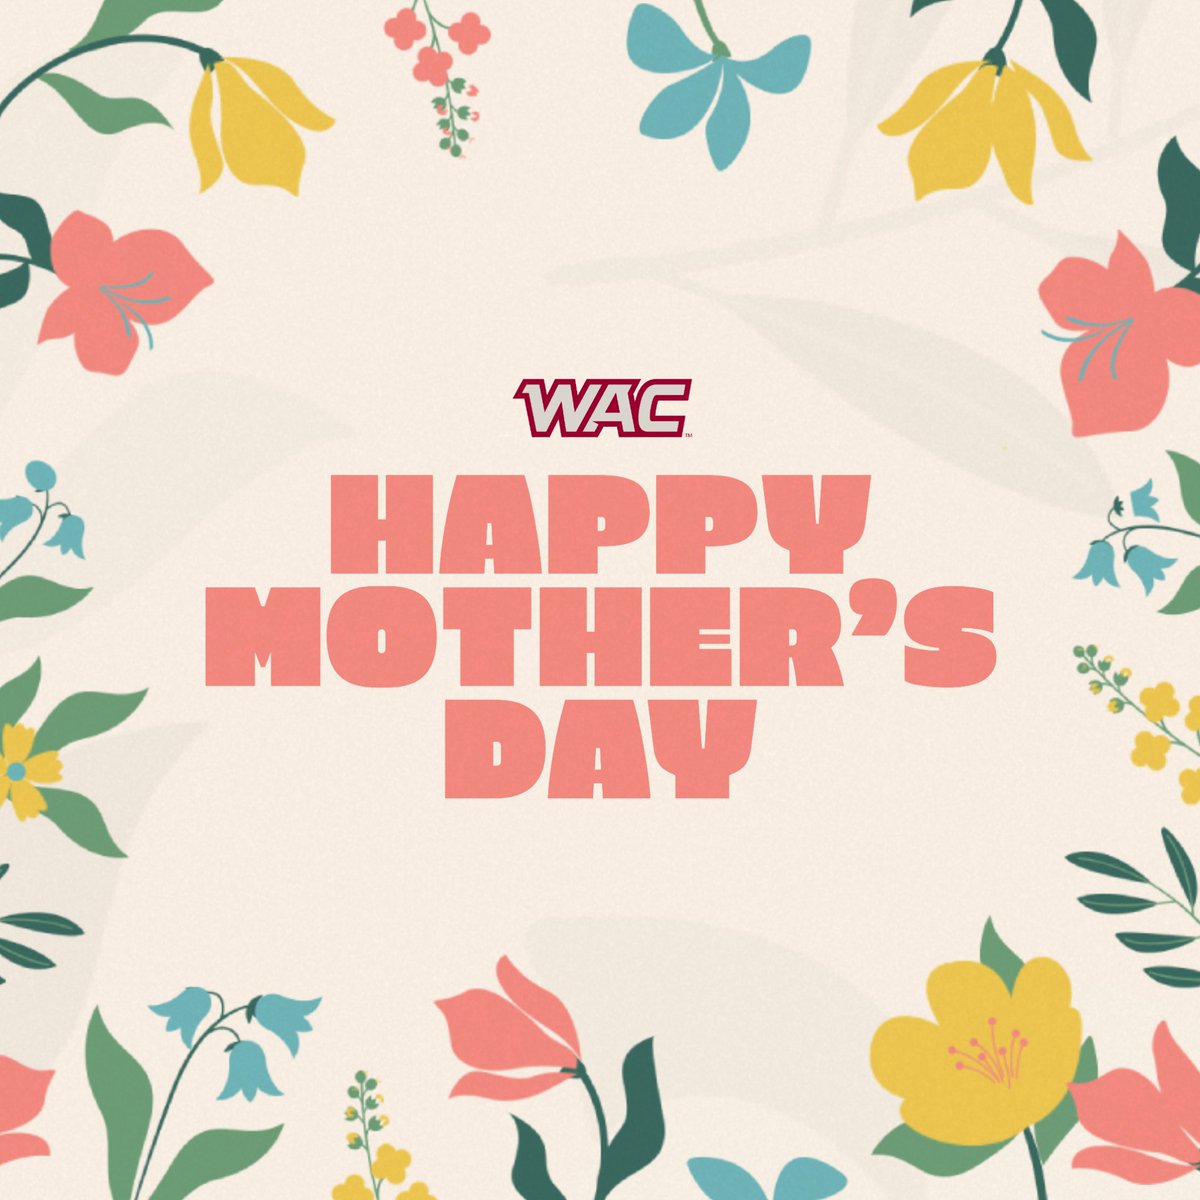 𝓗𝓪𝓹𝓹𝔂 𝓜𝓸𝓽𝓱𝓮𝓻'𝓼 𝓓𝓪𝔂 to all the mothers and mother figures 💜💐 #OneWAC